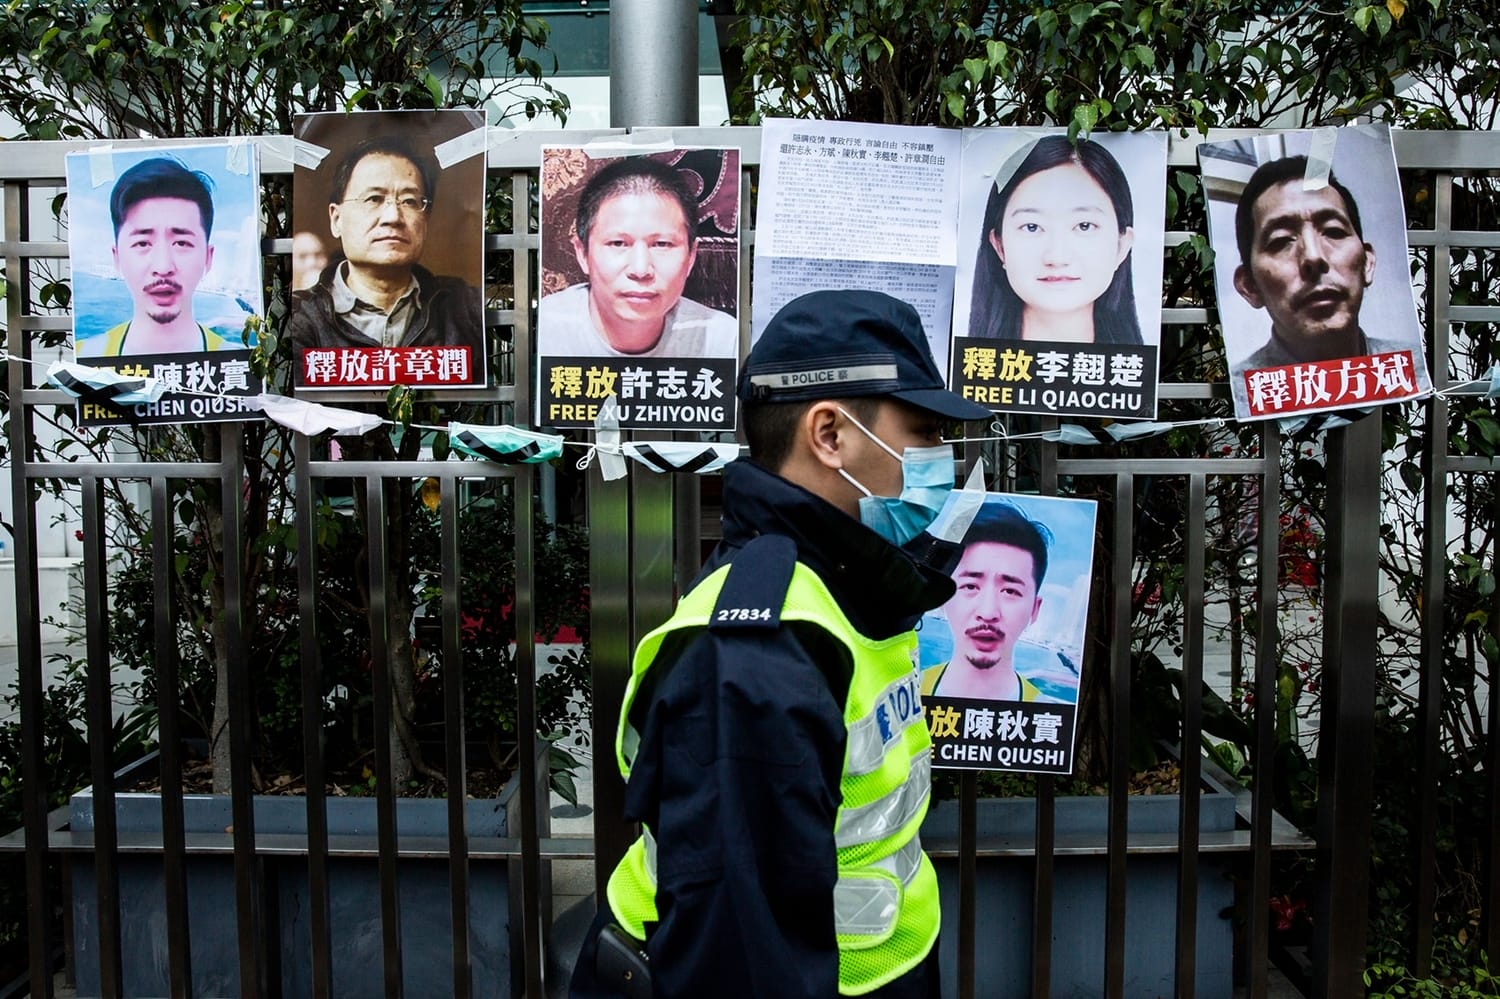 TOPSHOT - A police officer walks past placards of detained rights activists taped on the fence of the Chinese liaison office in Hong Kong on February 19, 2020, in protest against Beijings detention of prominent anti-corruption activist Xu Zhiyong. - Police in China have arrested Xu Zhiyong, a prominent anti-corruption activist who had been criticising President Xi Jinpings handling of the COVID-19 coronavirus. (Photo by ISAAC LAWRENCE / AFP) (Photo by ISAAC LAWRENCE/AFP via Getty Images)